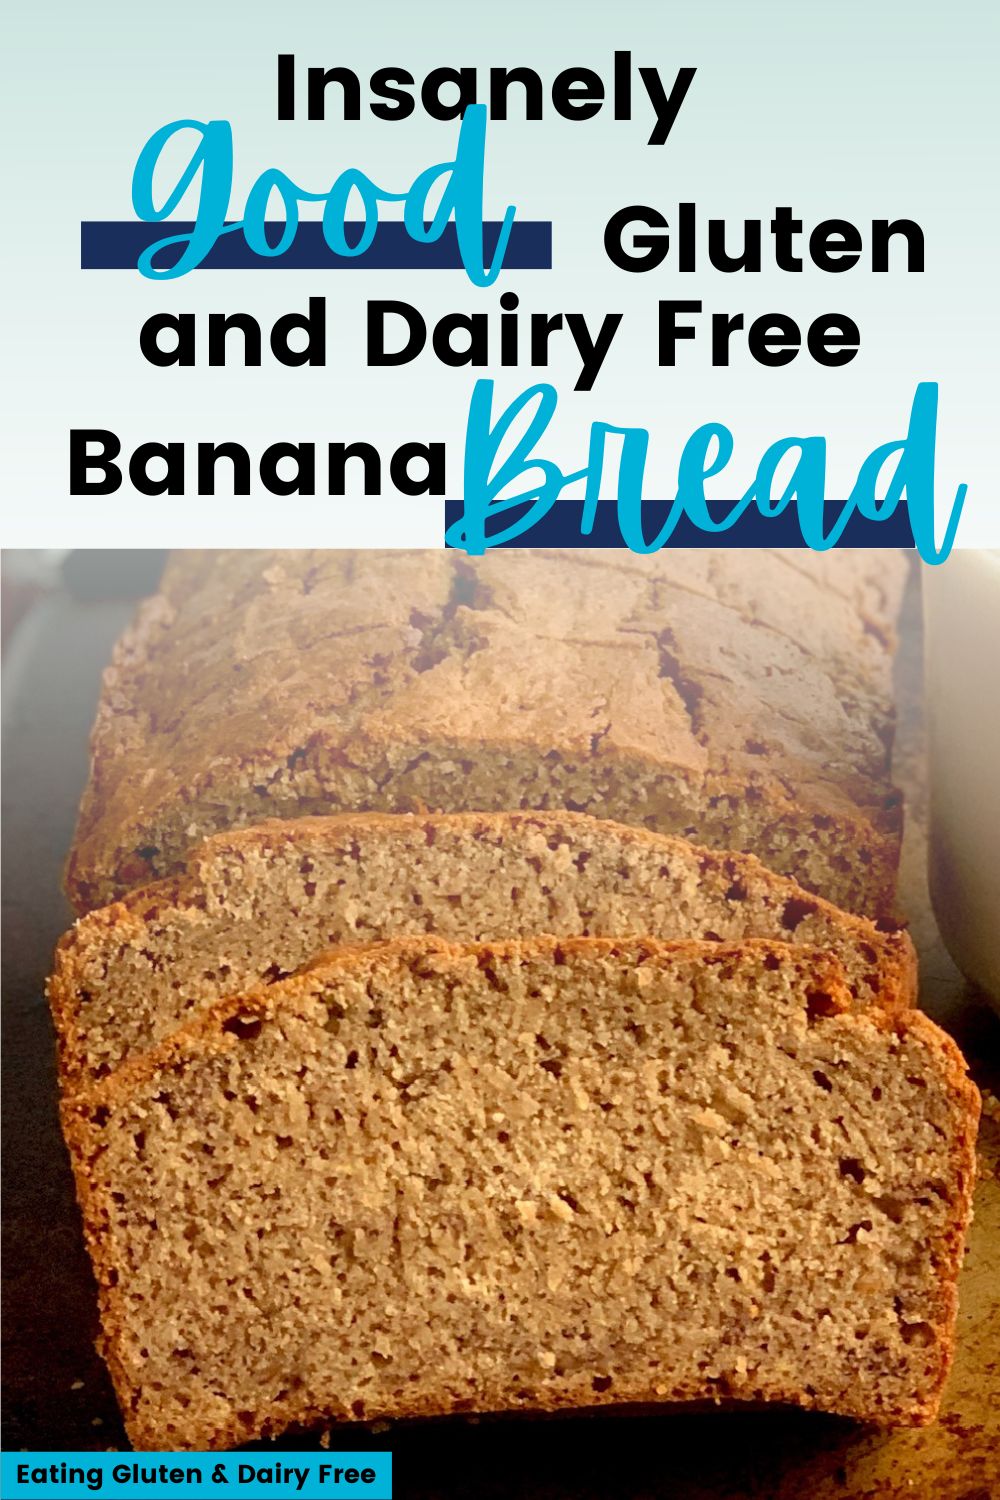 A few slices of homemade gluten free banana bread with text overlay.